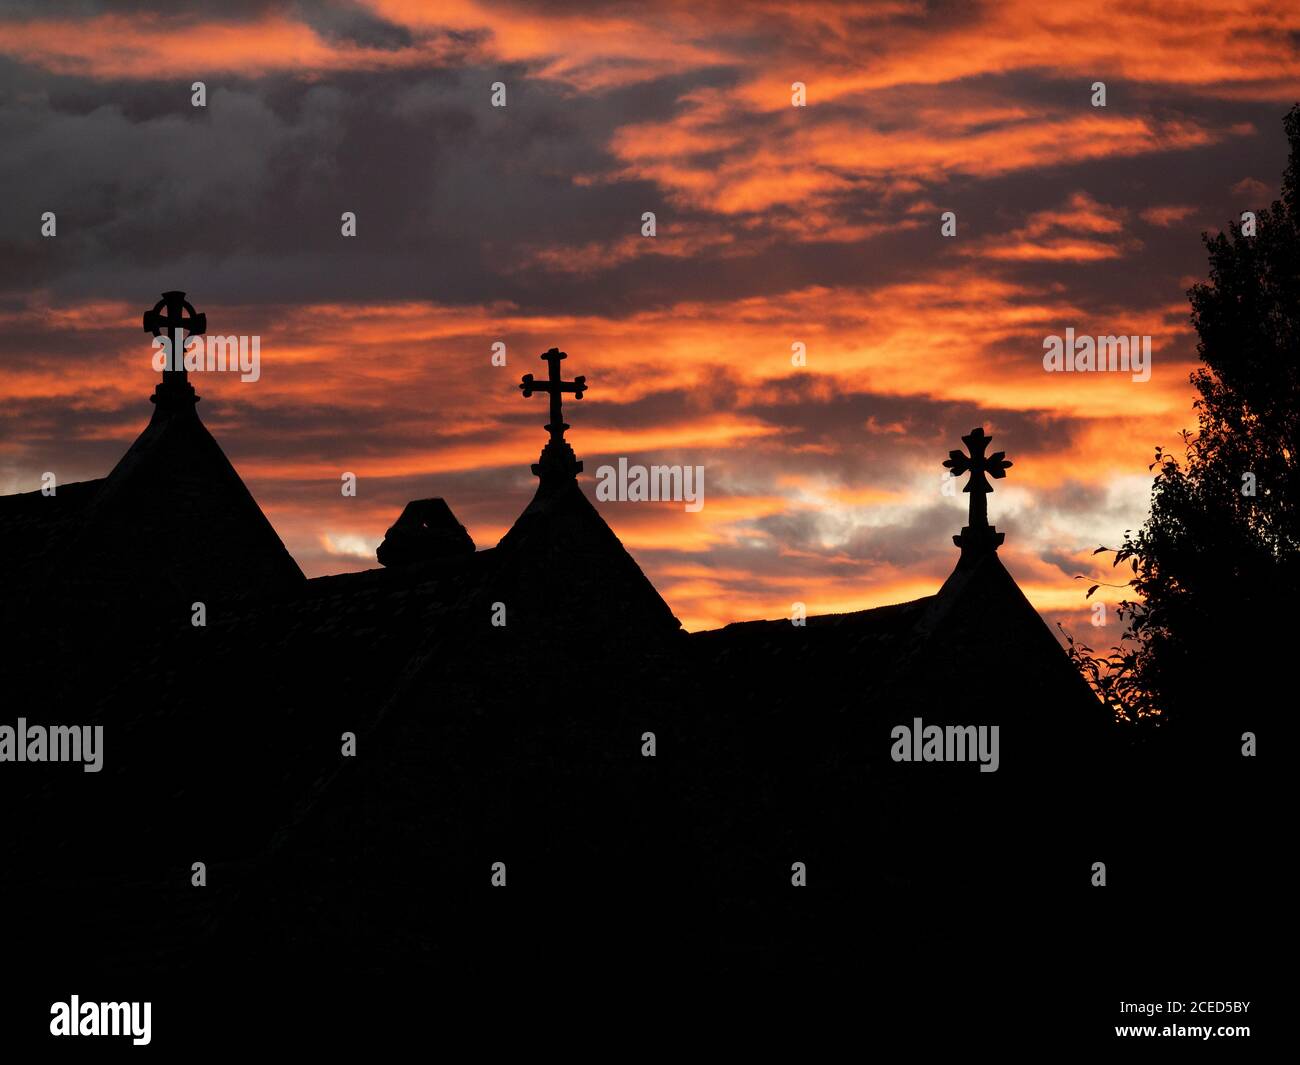 The crosses of St Bartholomew's church in Shapwick, Dorset, UK, silhouetted against the glowing sunset sky. Stock Photo